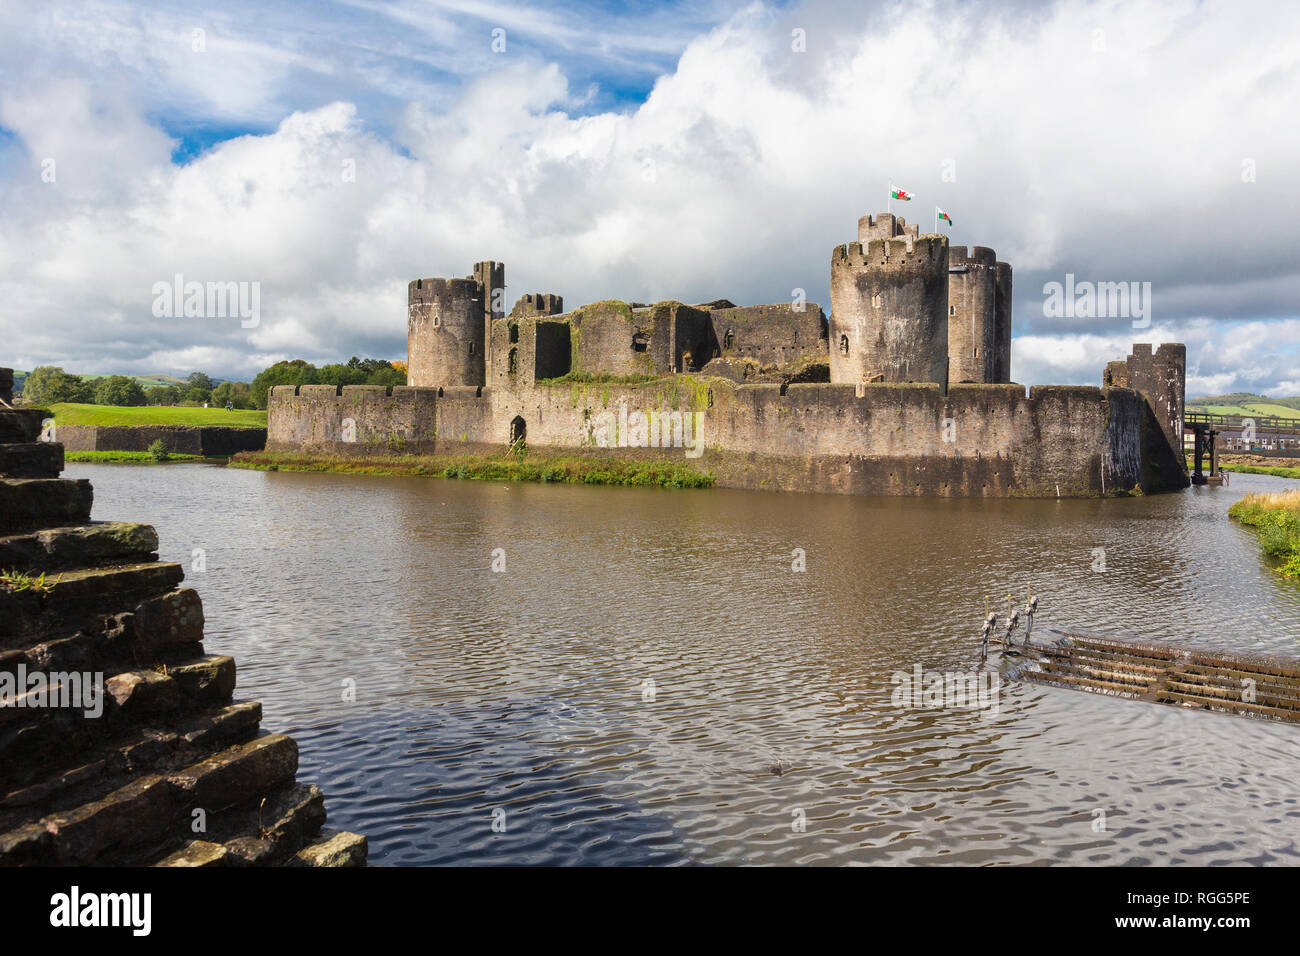 Caerphilly, Caerphilly, Wales, United Kingdom. Caerphilly castle with its moat. Stock Photo